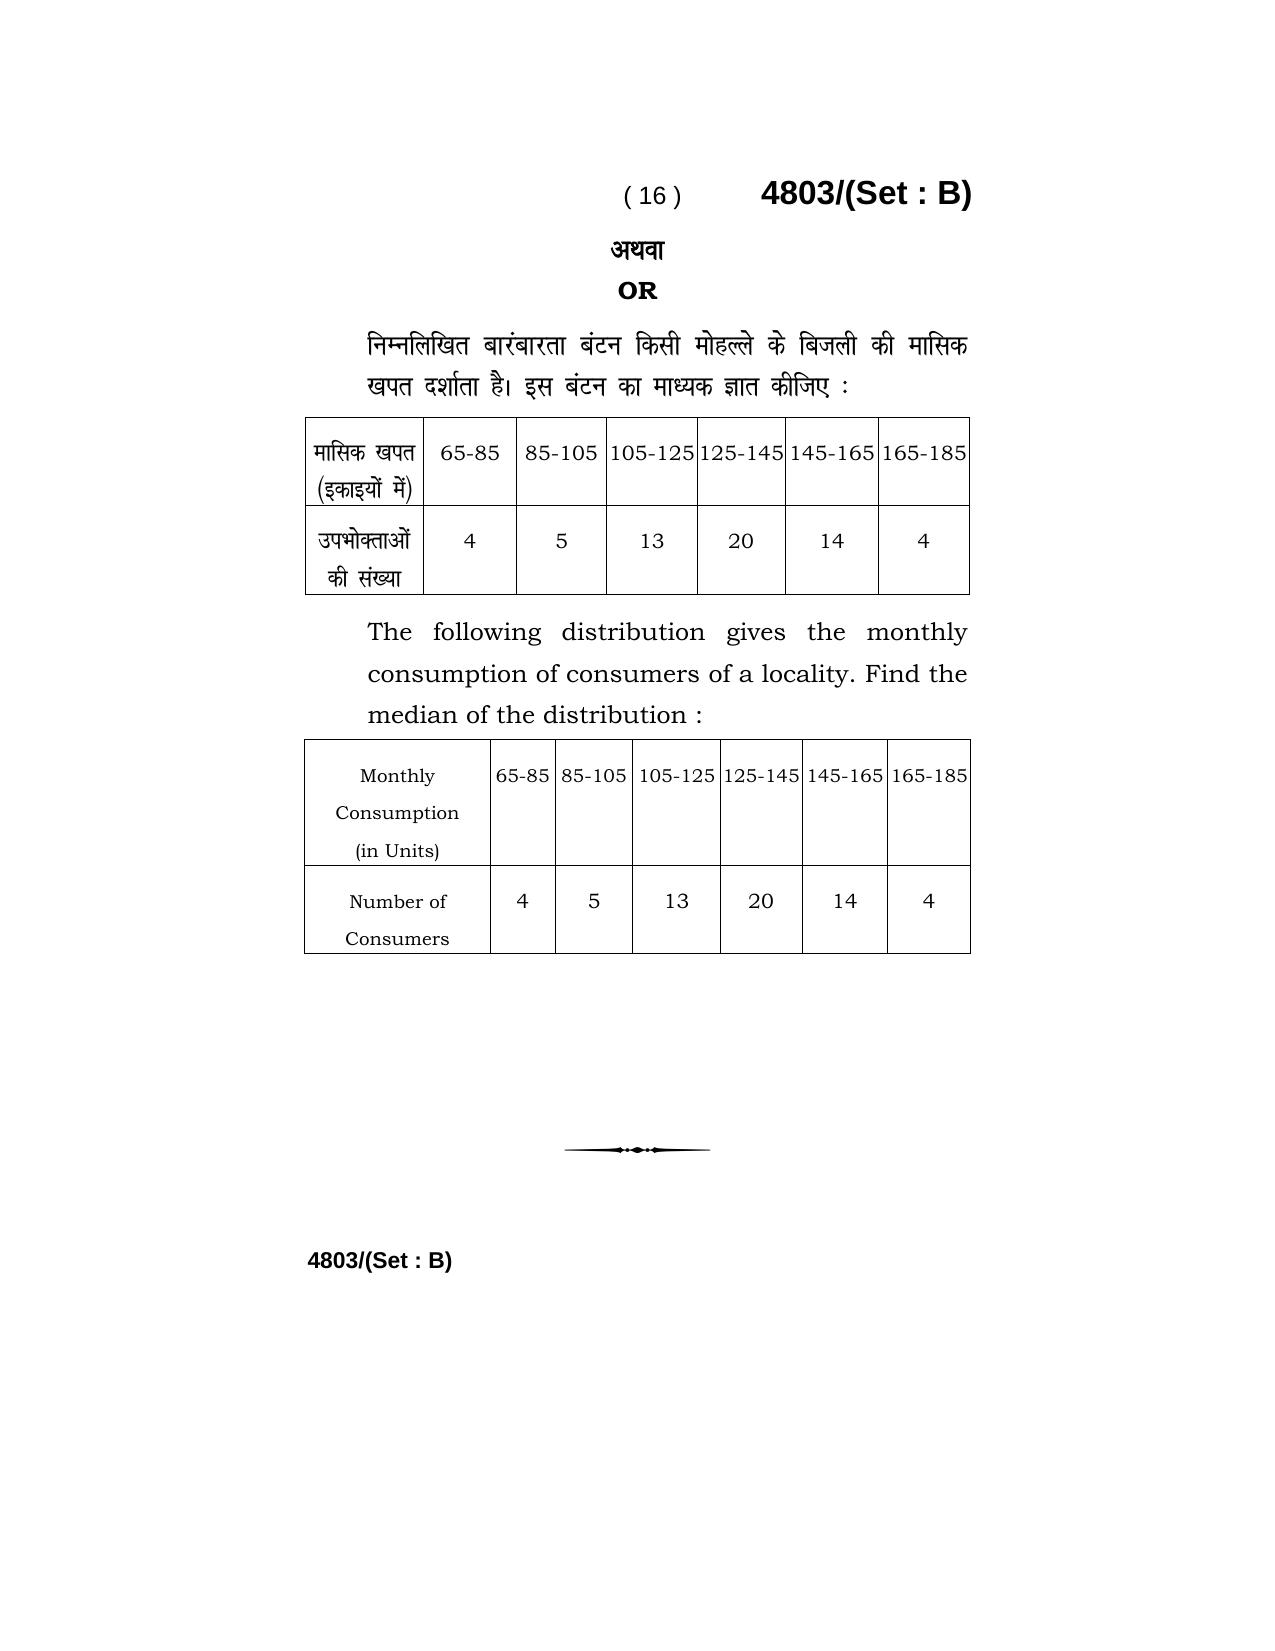 Haryana Board HBSE Class 10 Mathematics 2020 Question Paper - Page 32